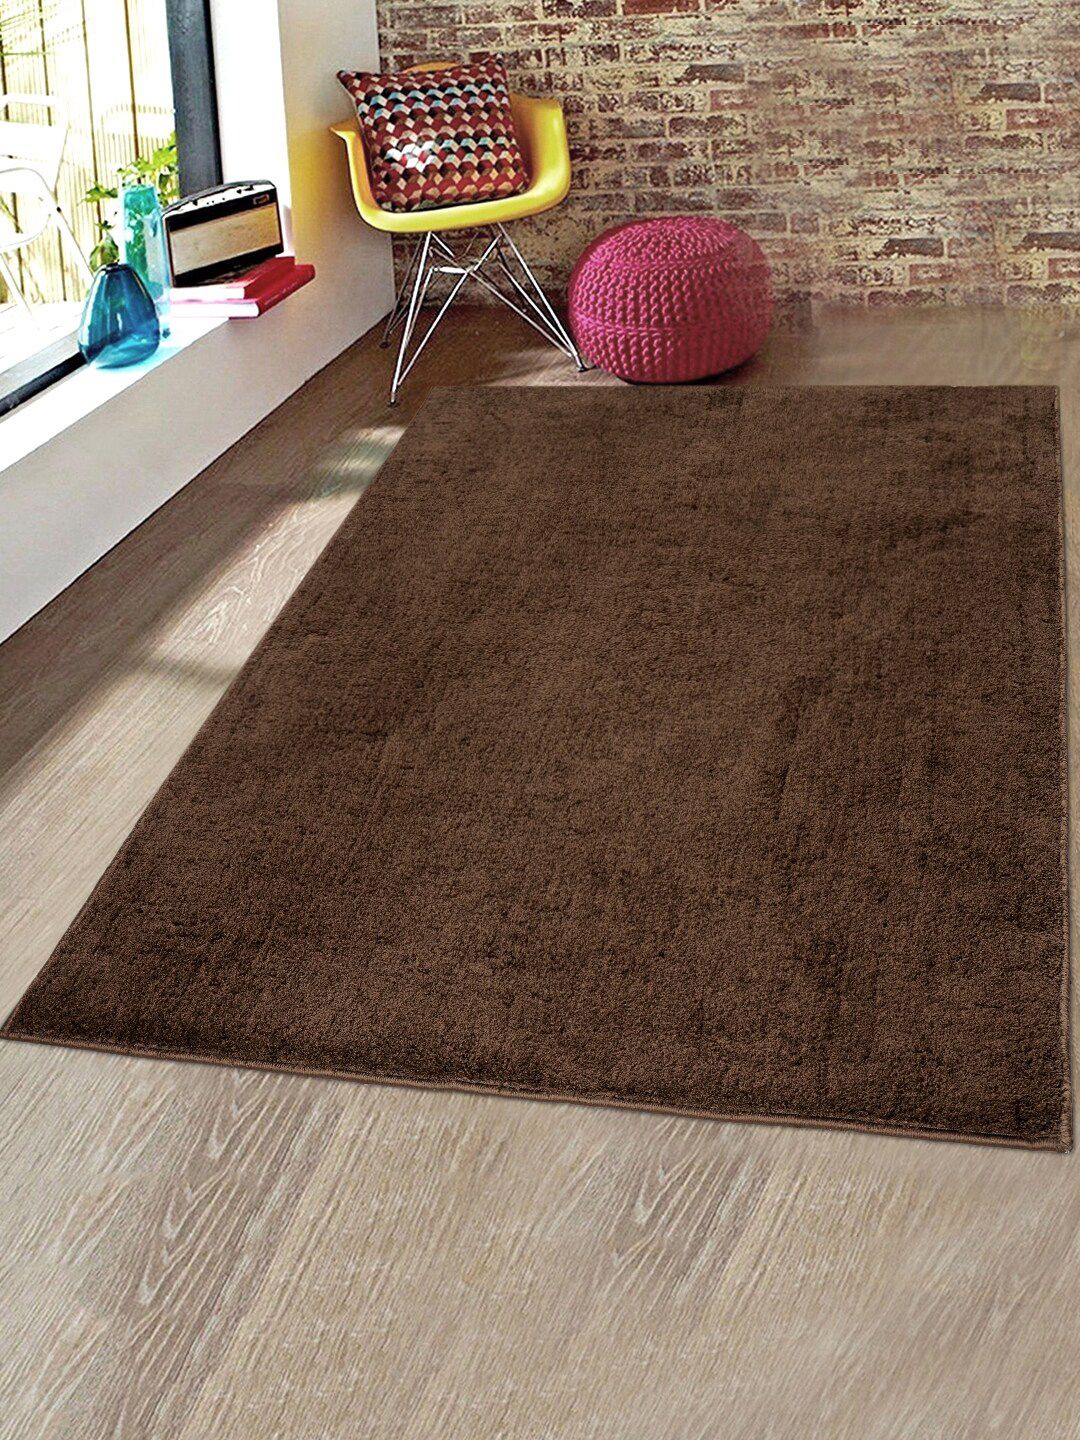 Saral Home Brown Solid Shaggy Anti-Skid Cotton Carpet Price in India